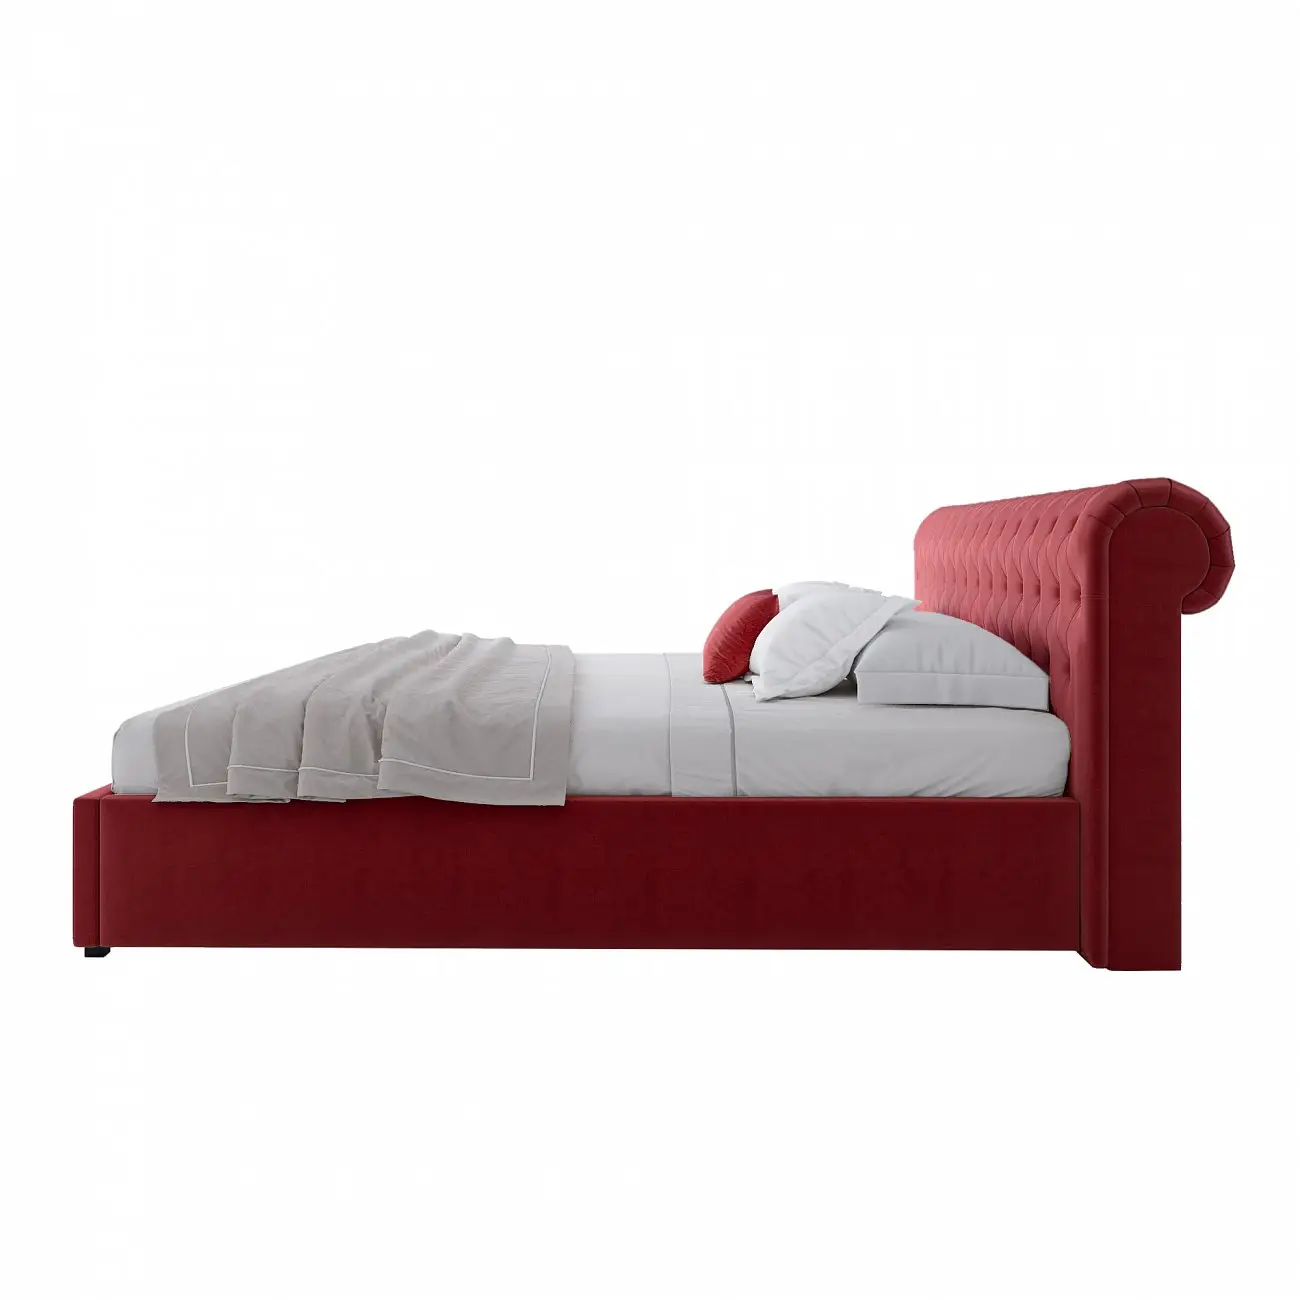 Euro bed with upholstered headboard 200x200 cm red Sweet Dreams